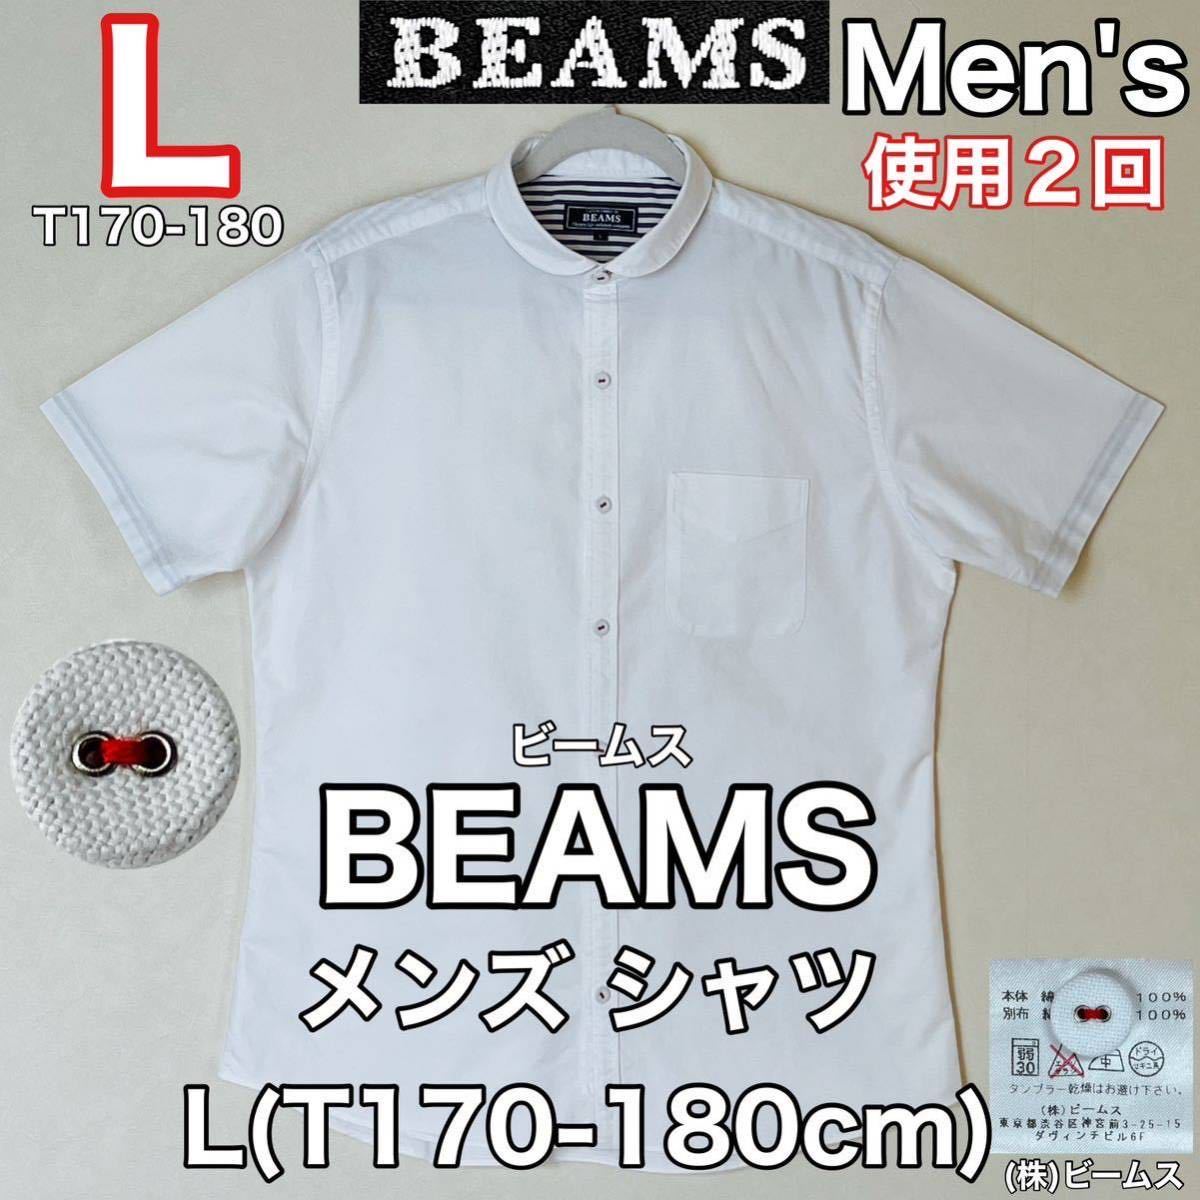  super-beauty goods BEAMS( Beams ) men's shirt L(T170-180cm) use 2 times white short sleeves tops spring summer autumn outdoor cotton cotton ( stock ) Beams 